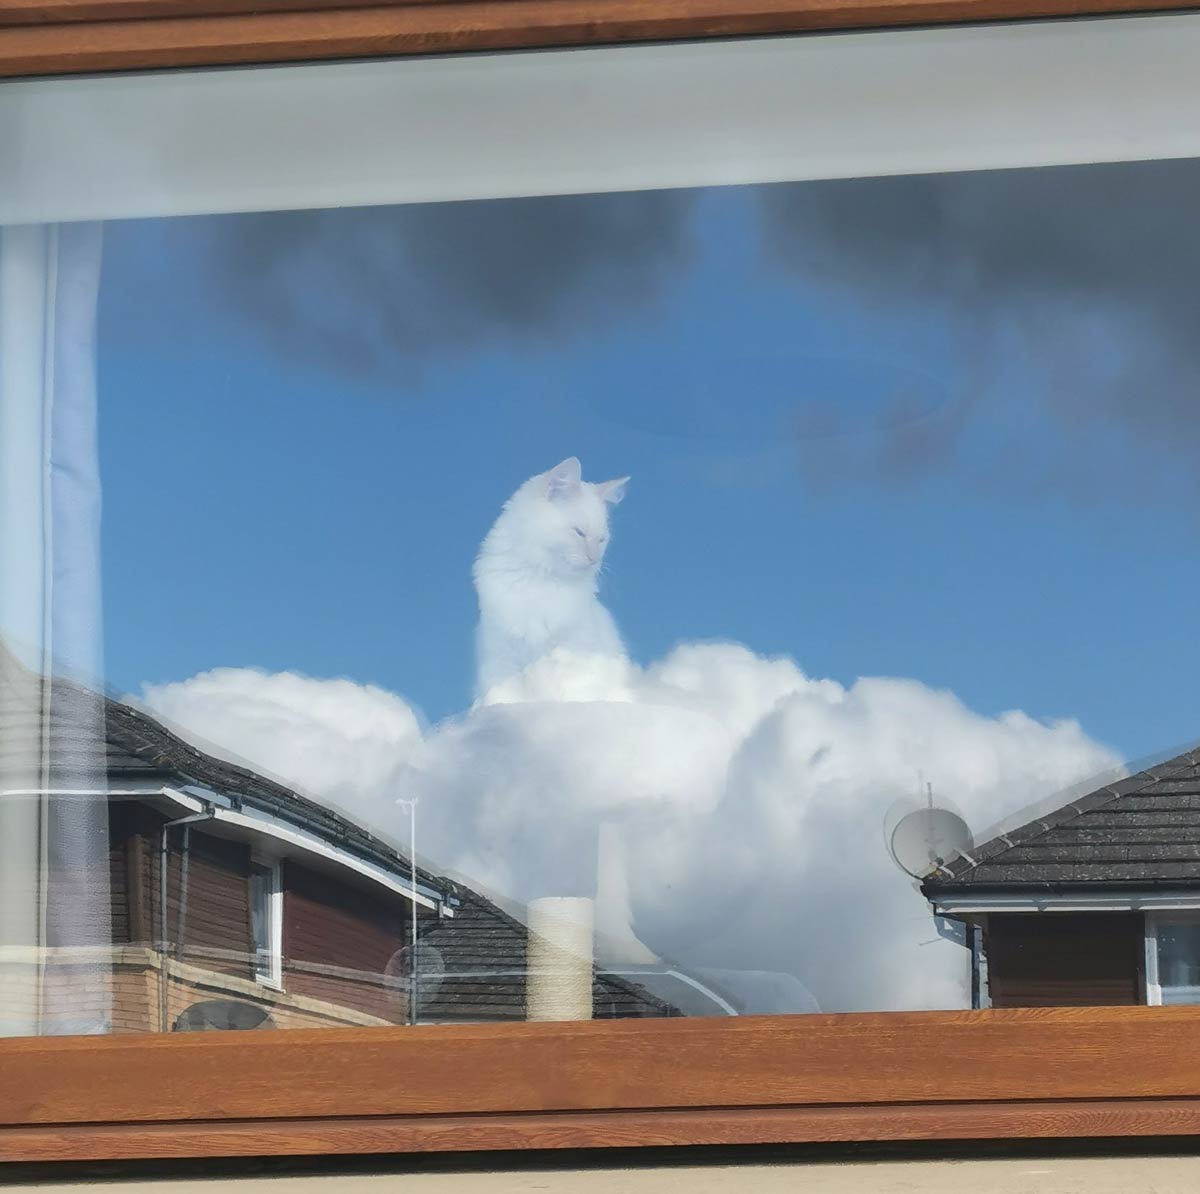 This cat looking out the window